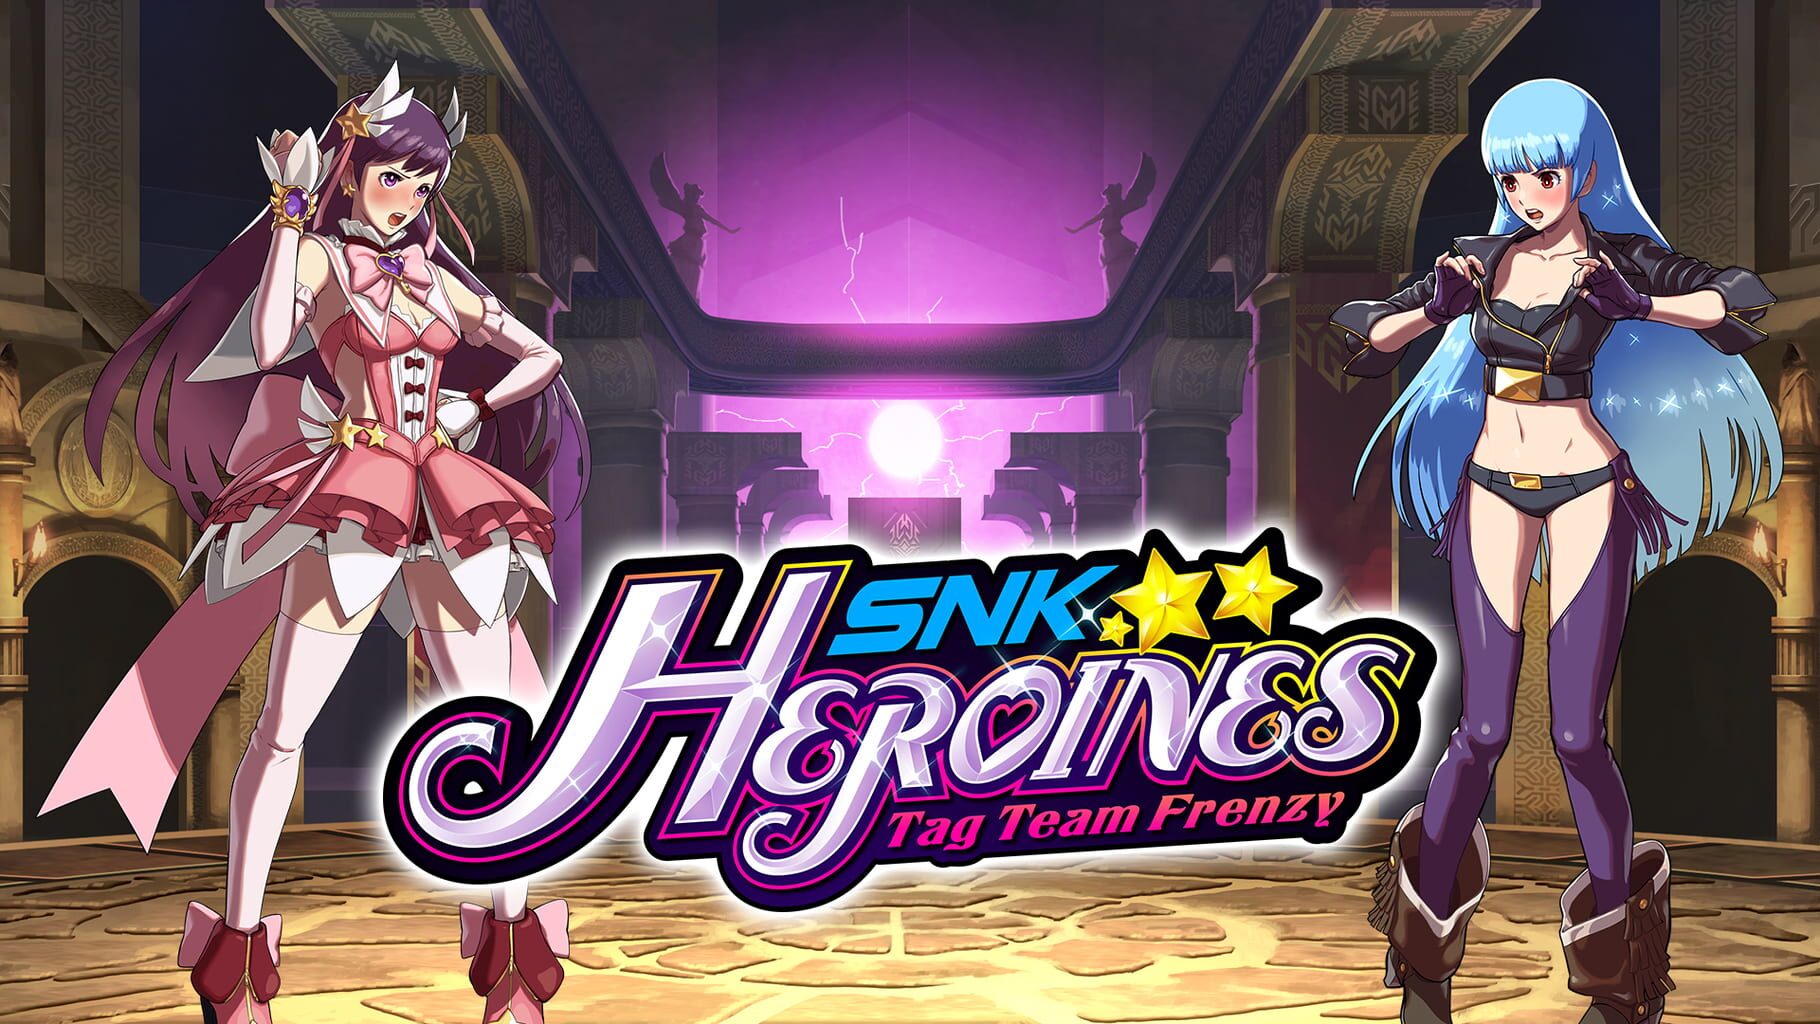 Artwork for SNK Heroines: Tag Team Frenzy